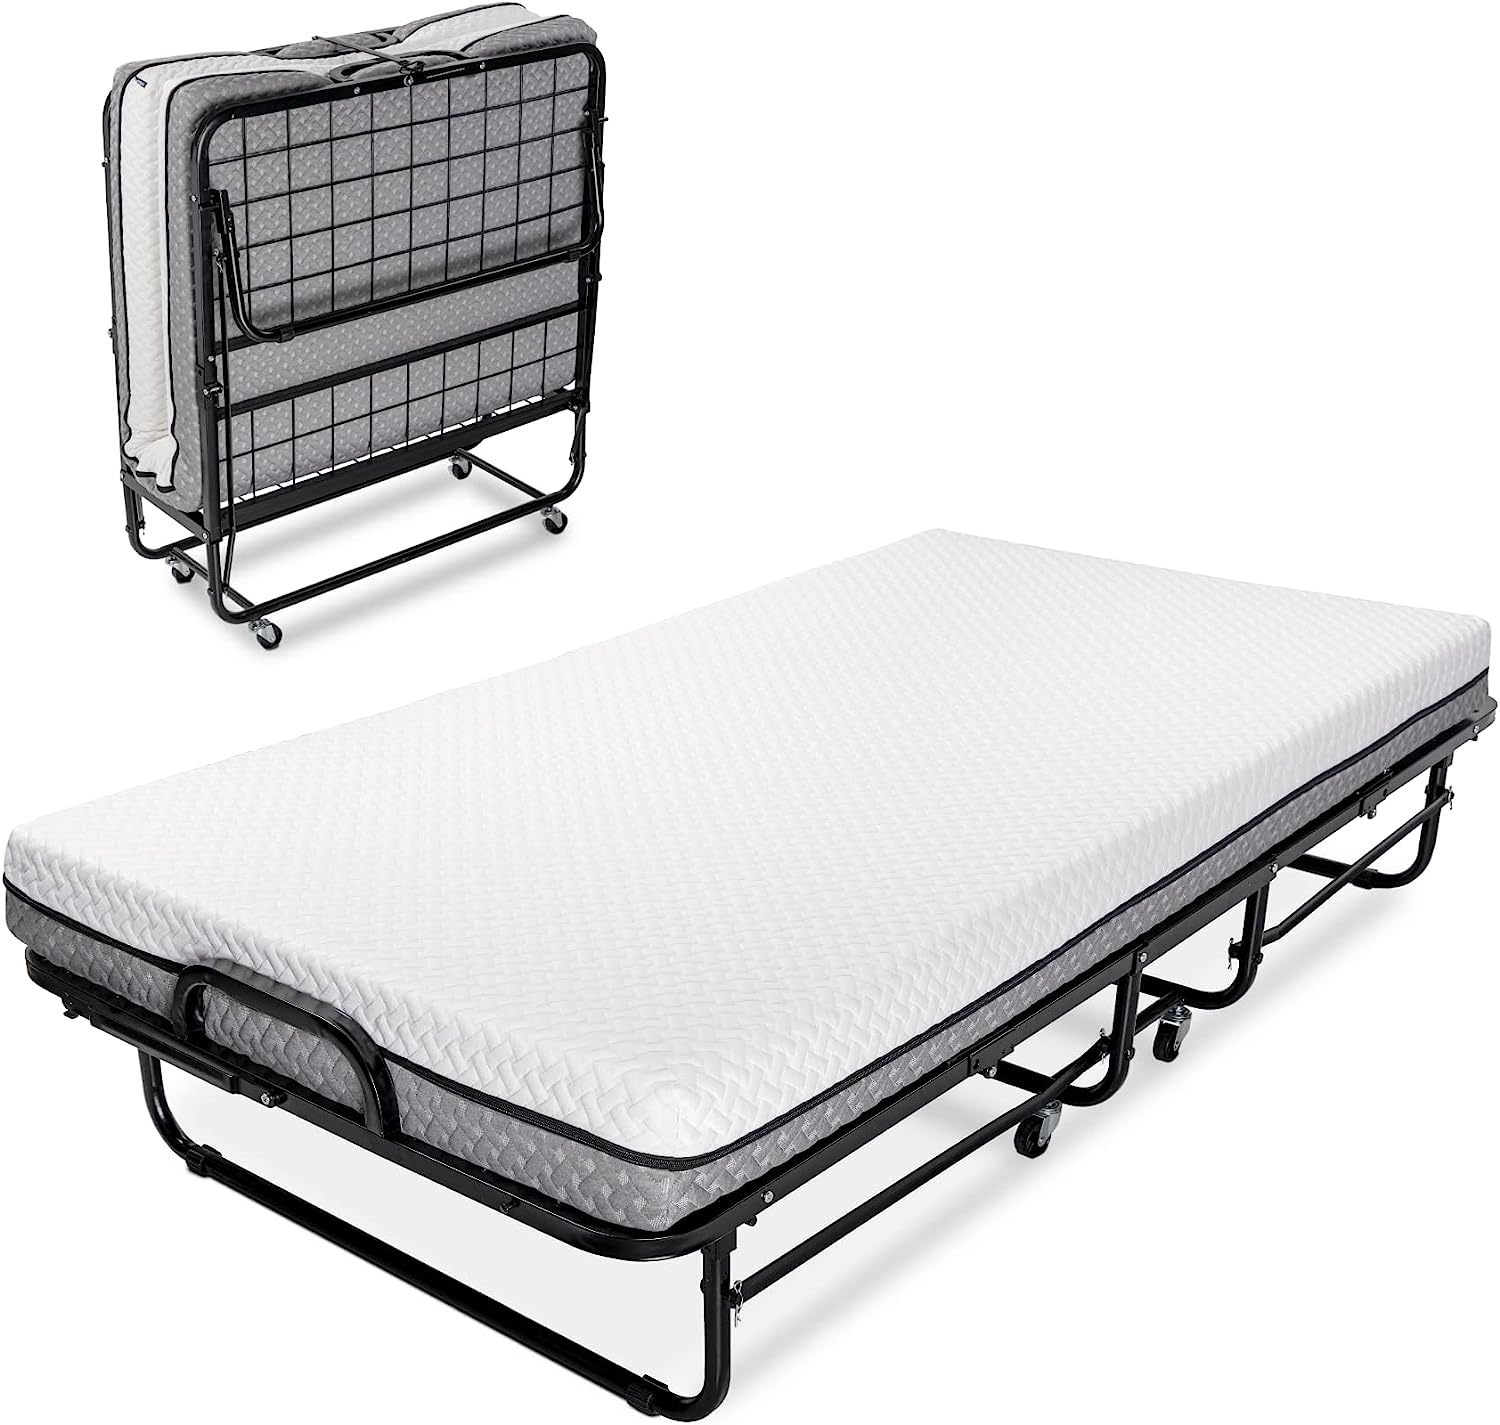 Milliard Deluxe Diplomat Folding Bed – Twin Size - [...]